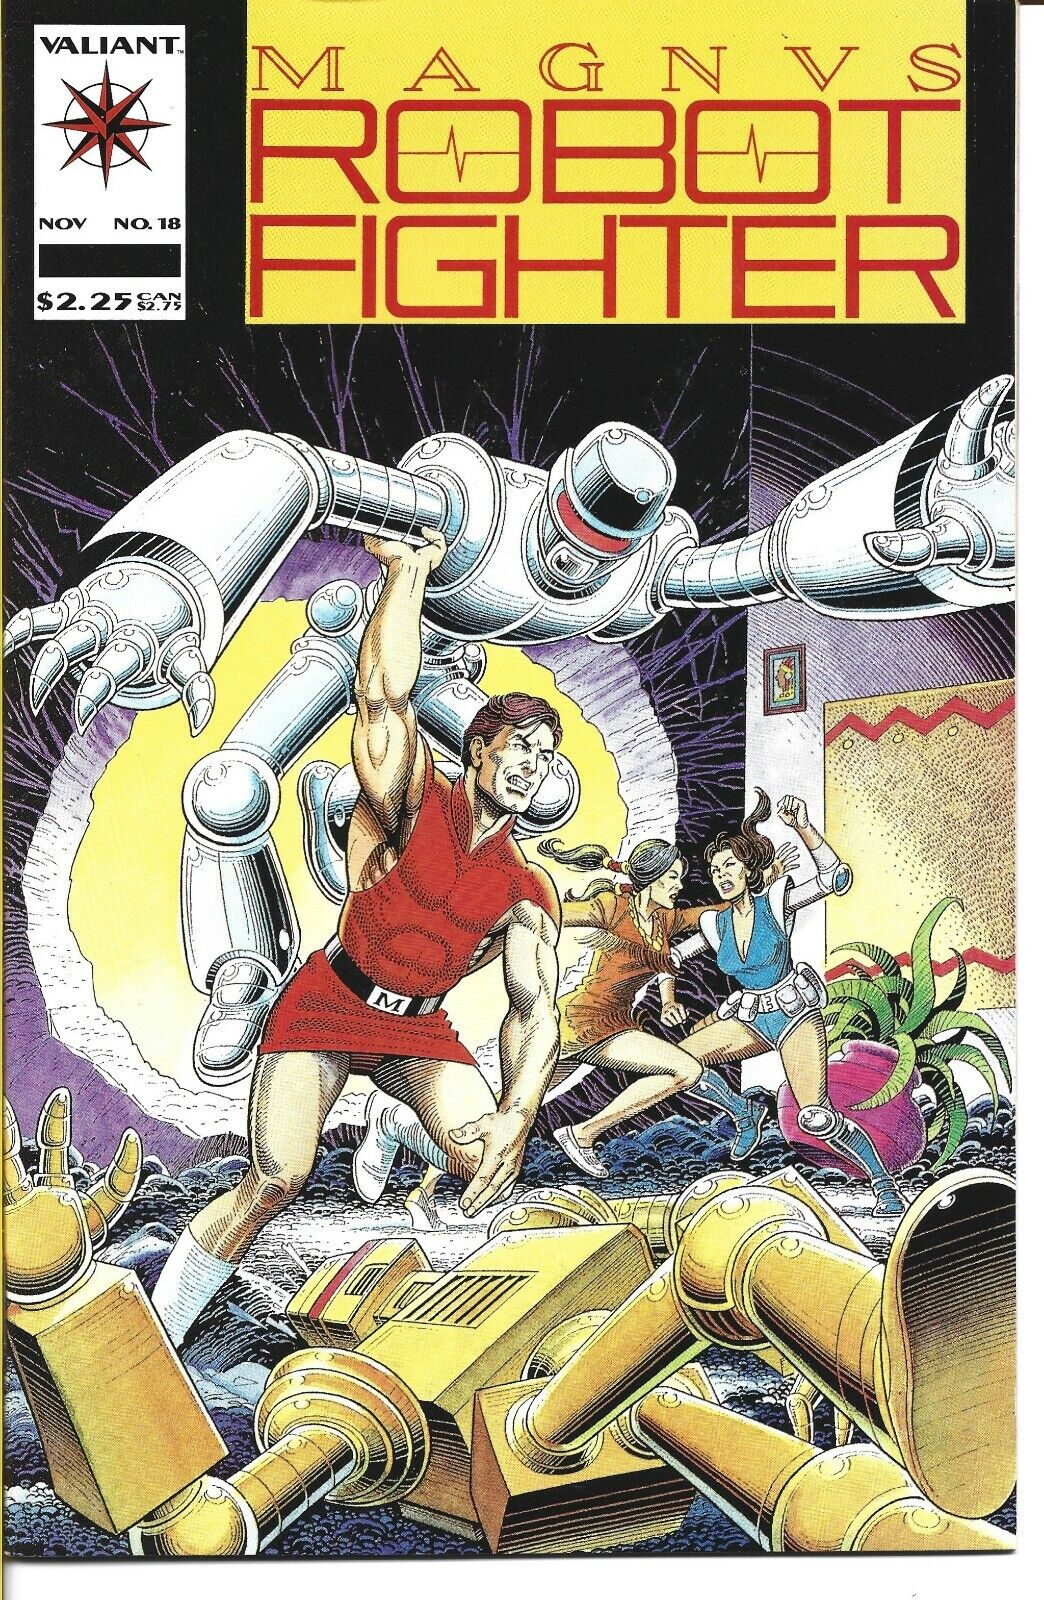 MAGNUS ROBOT FIGHTER #18 VALIANT COMICS 1992 BAGGED & BOARDED 